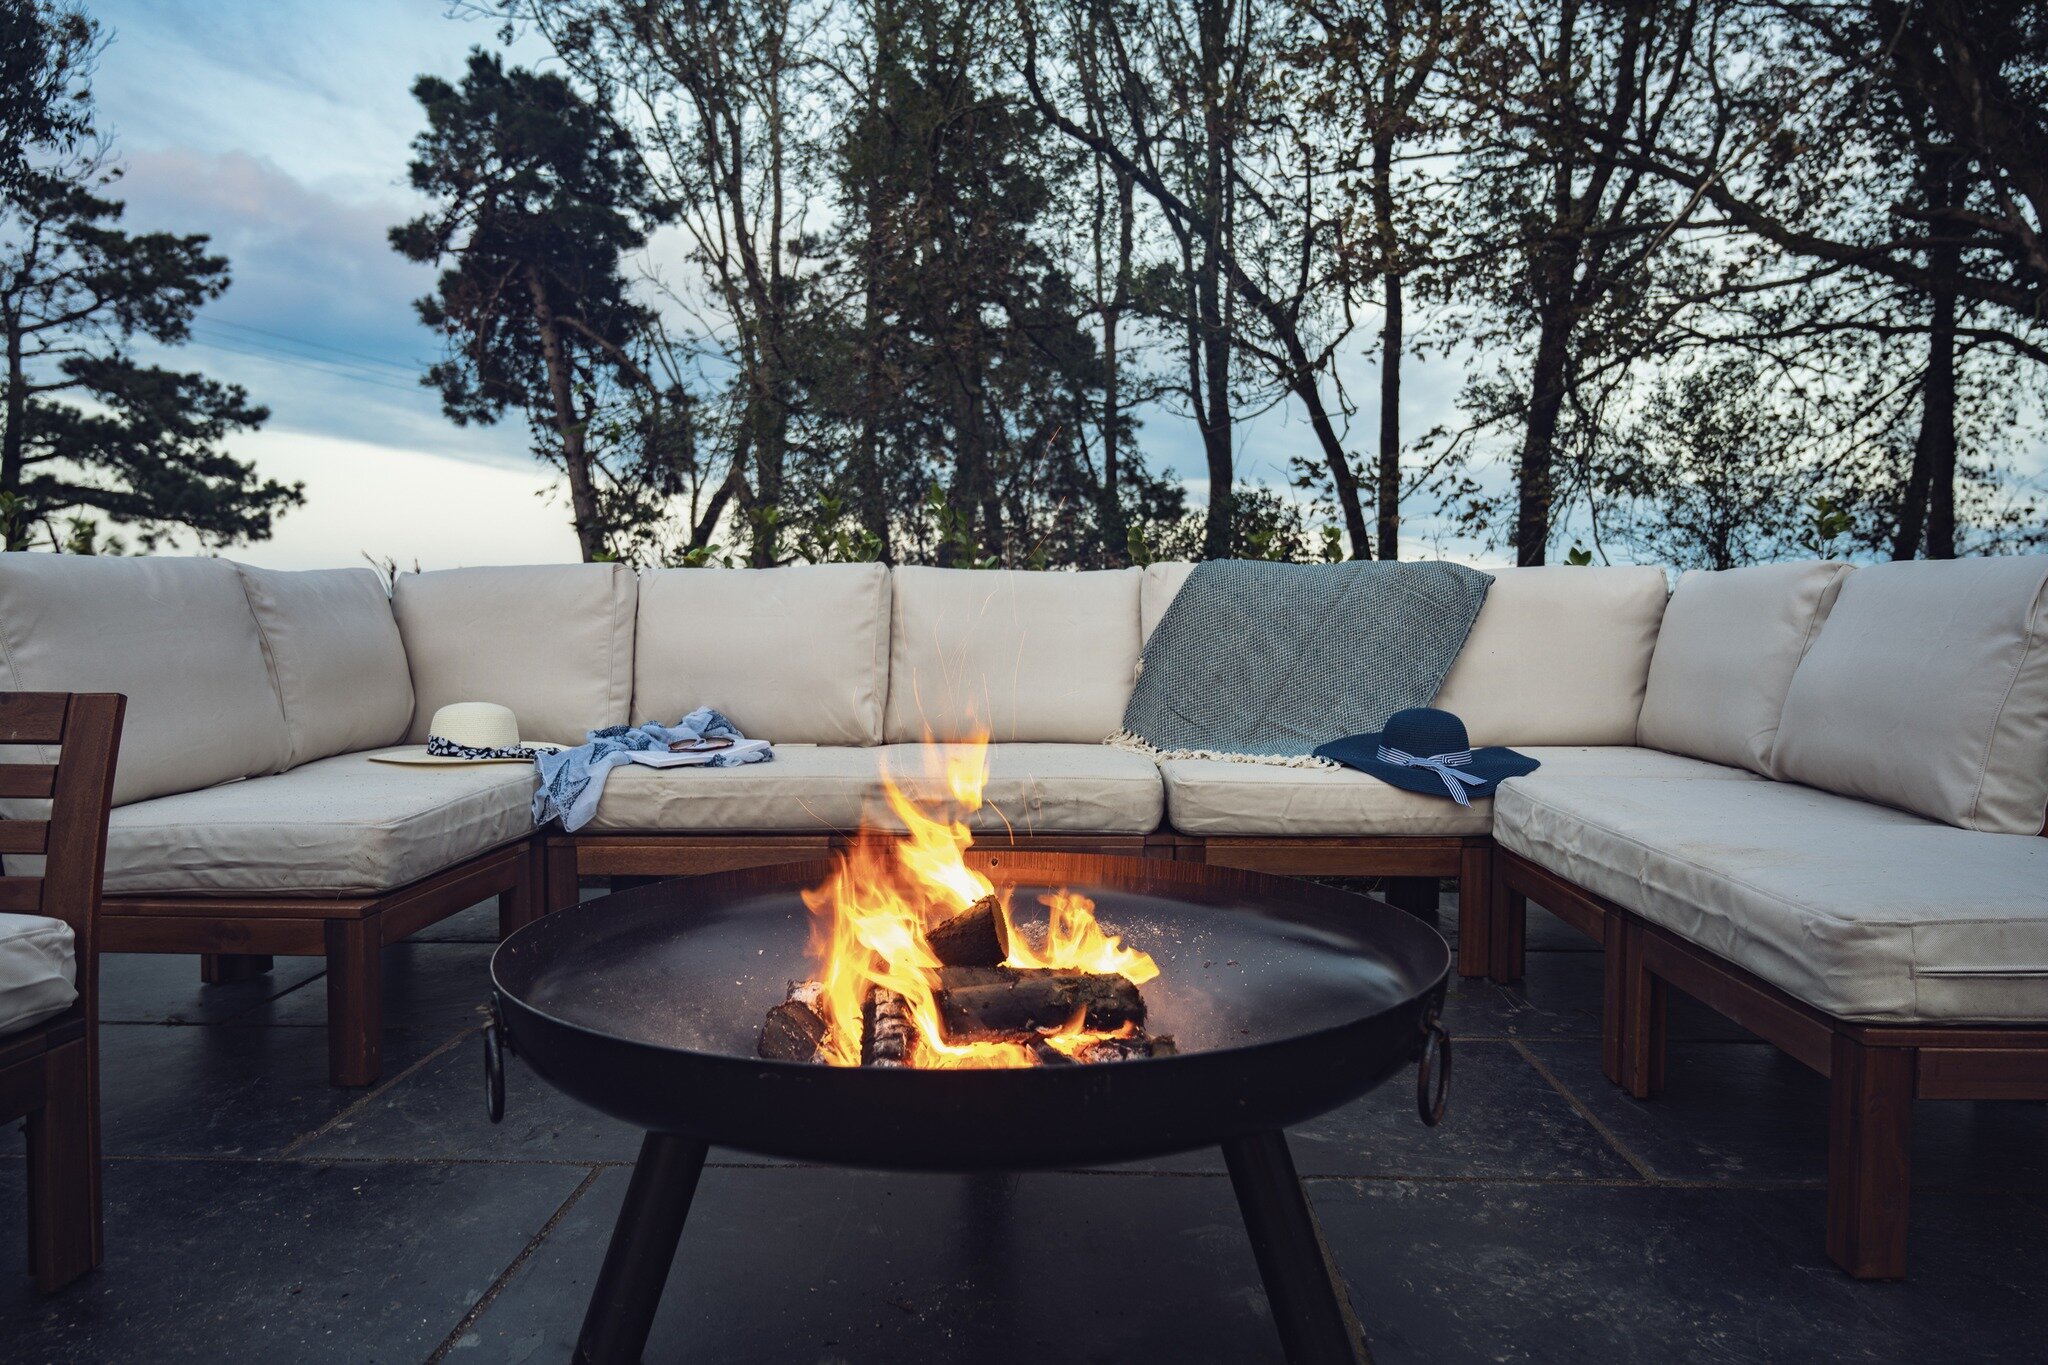 Gather around the fire and make memories that will last a lifetime. The perfect end to a perfect day - roasting marshmallows by the fire pit at Bogee Farmhouse.

#farmhouse #bogeefarmhouse #farm #padstow #lovecornwall #bogeefarm #farmstay #holidaycot